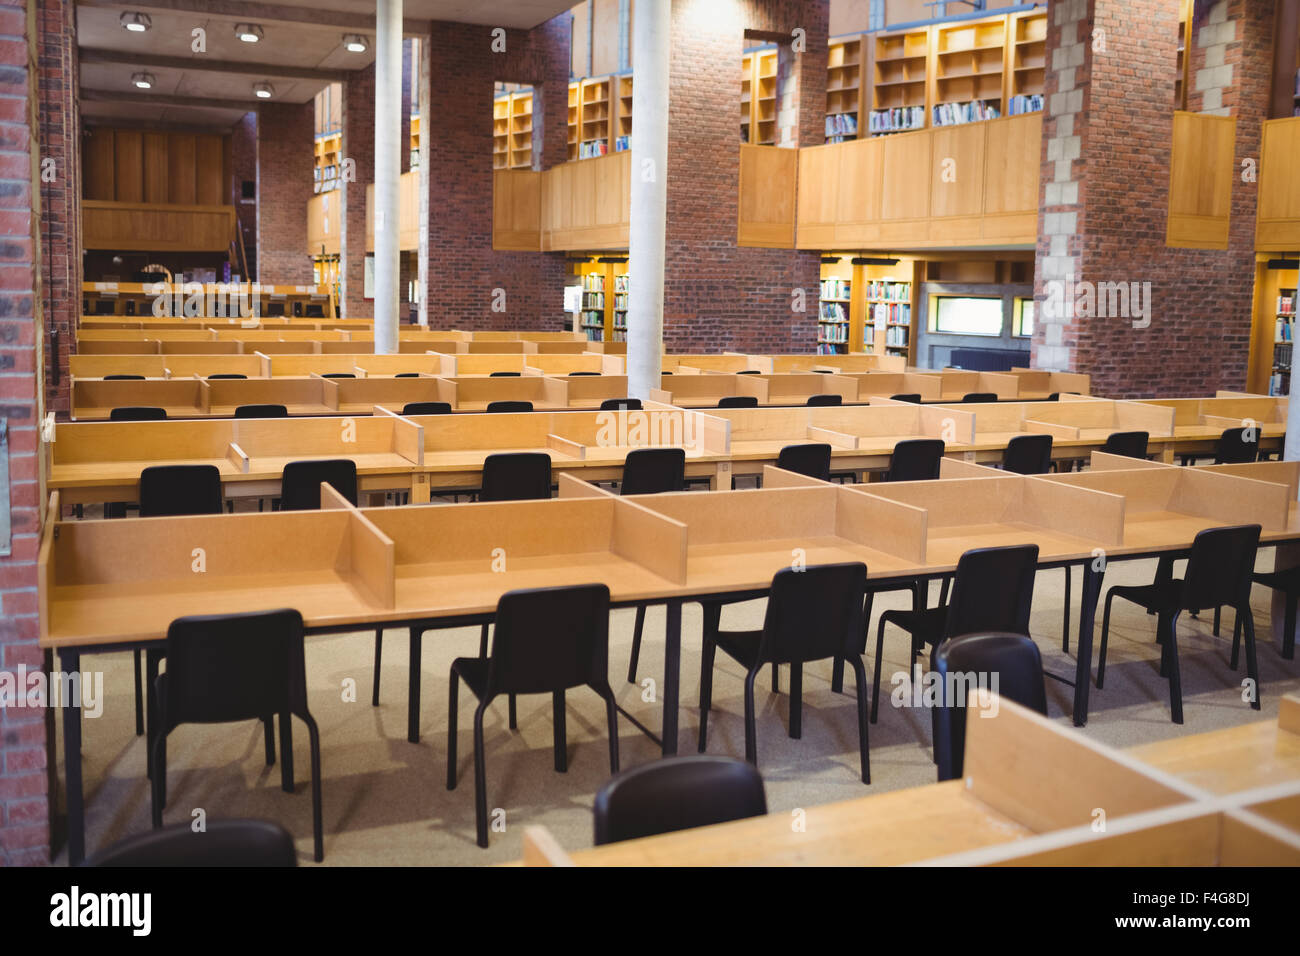 Empty seats in row at library Stock Photo